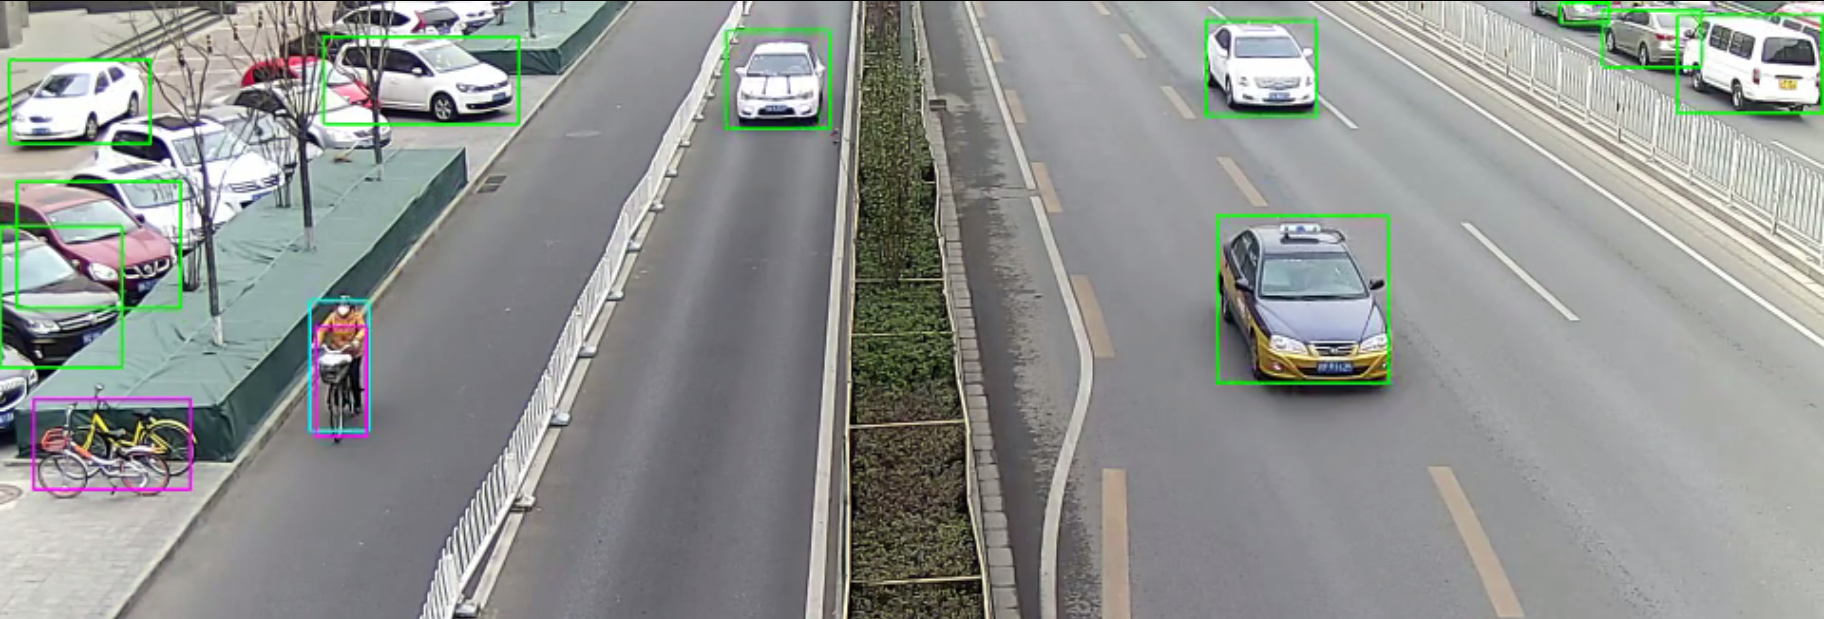 _images/person-vehicle-bike-detection-2000.png